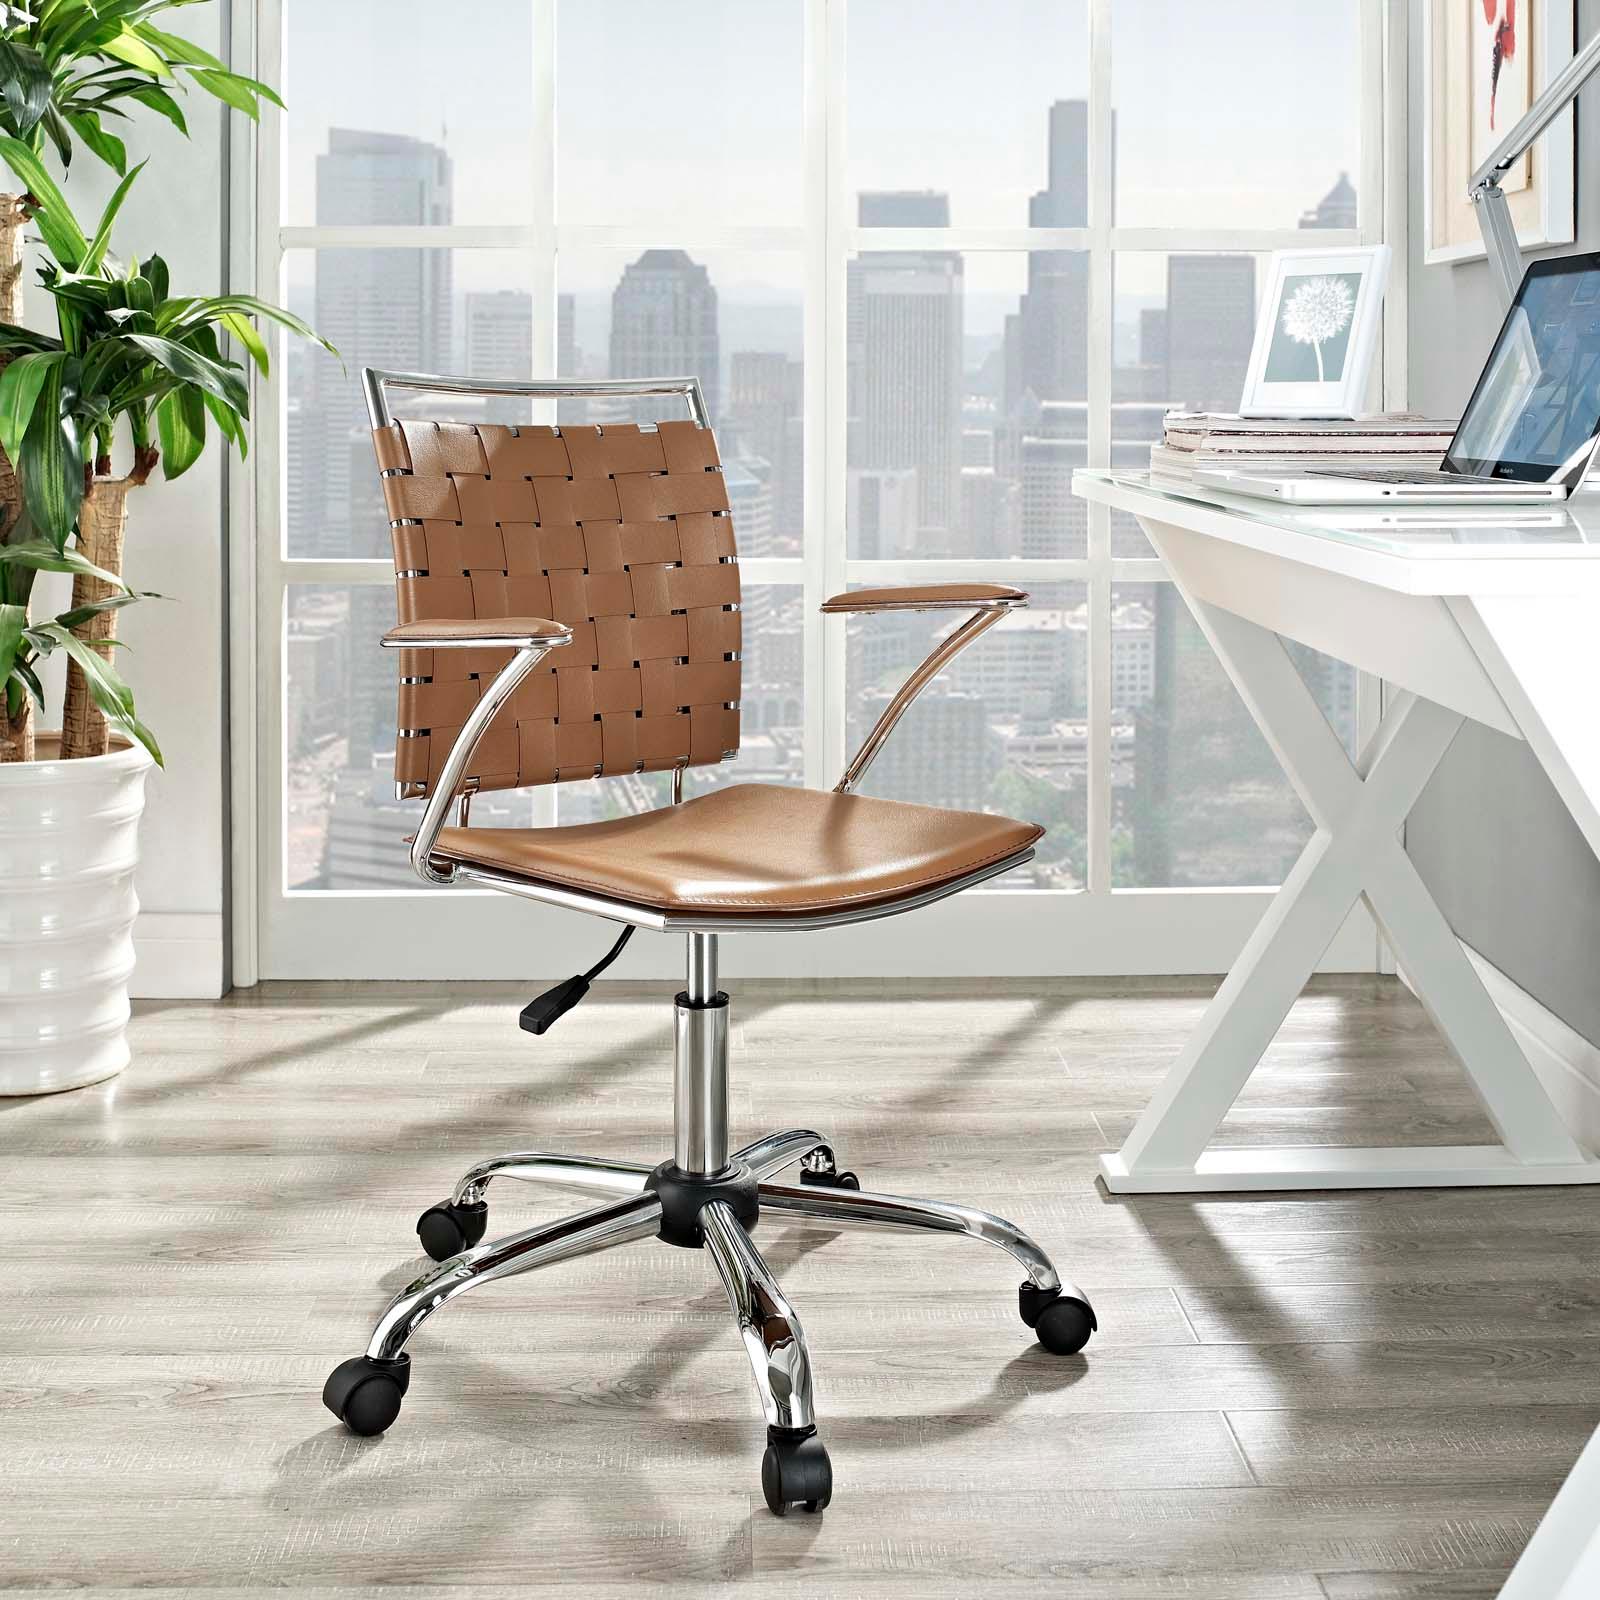 Modway Fuse Office Chair FredCo